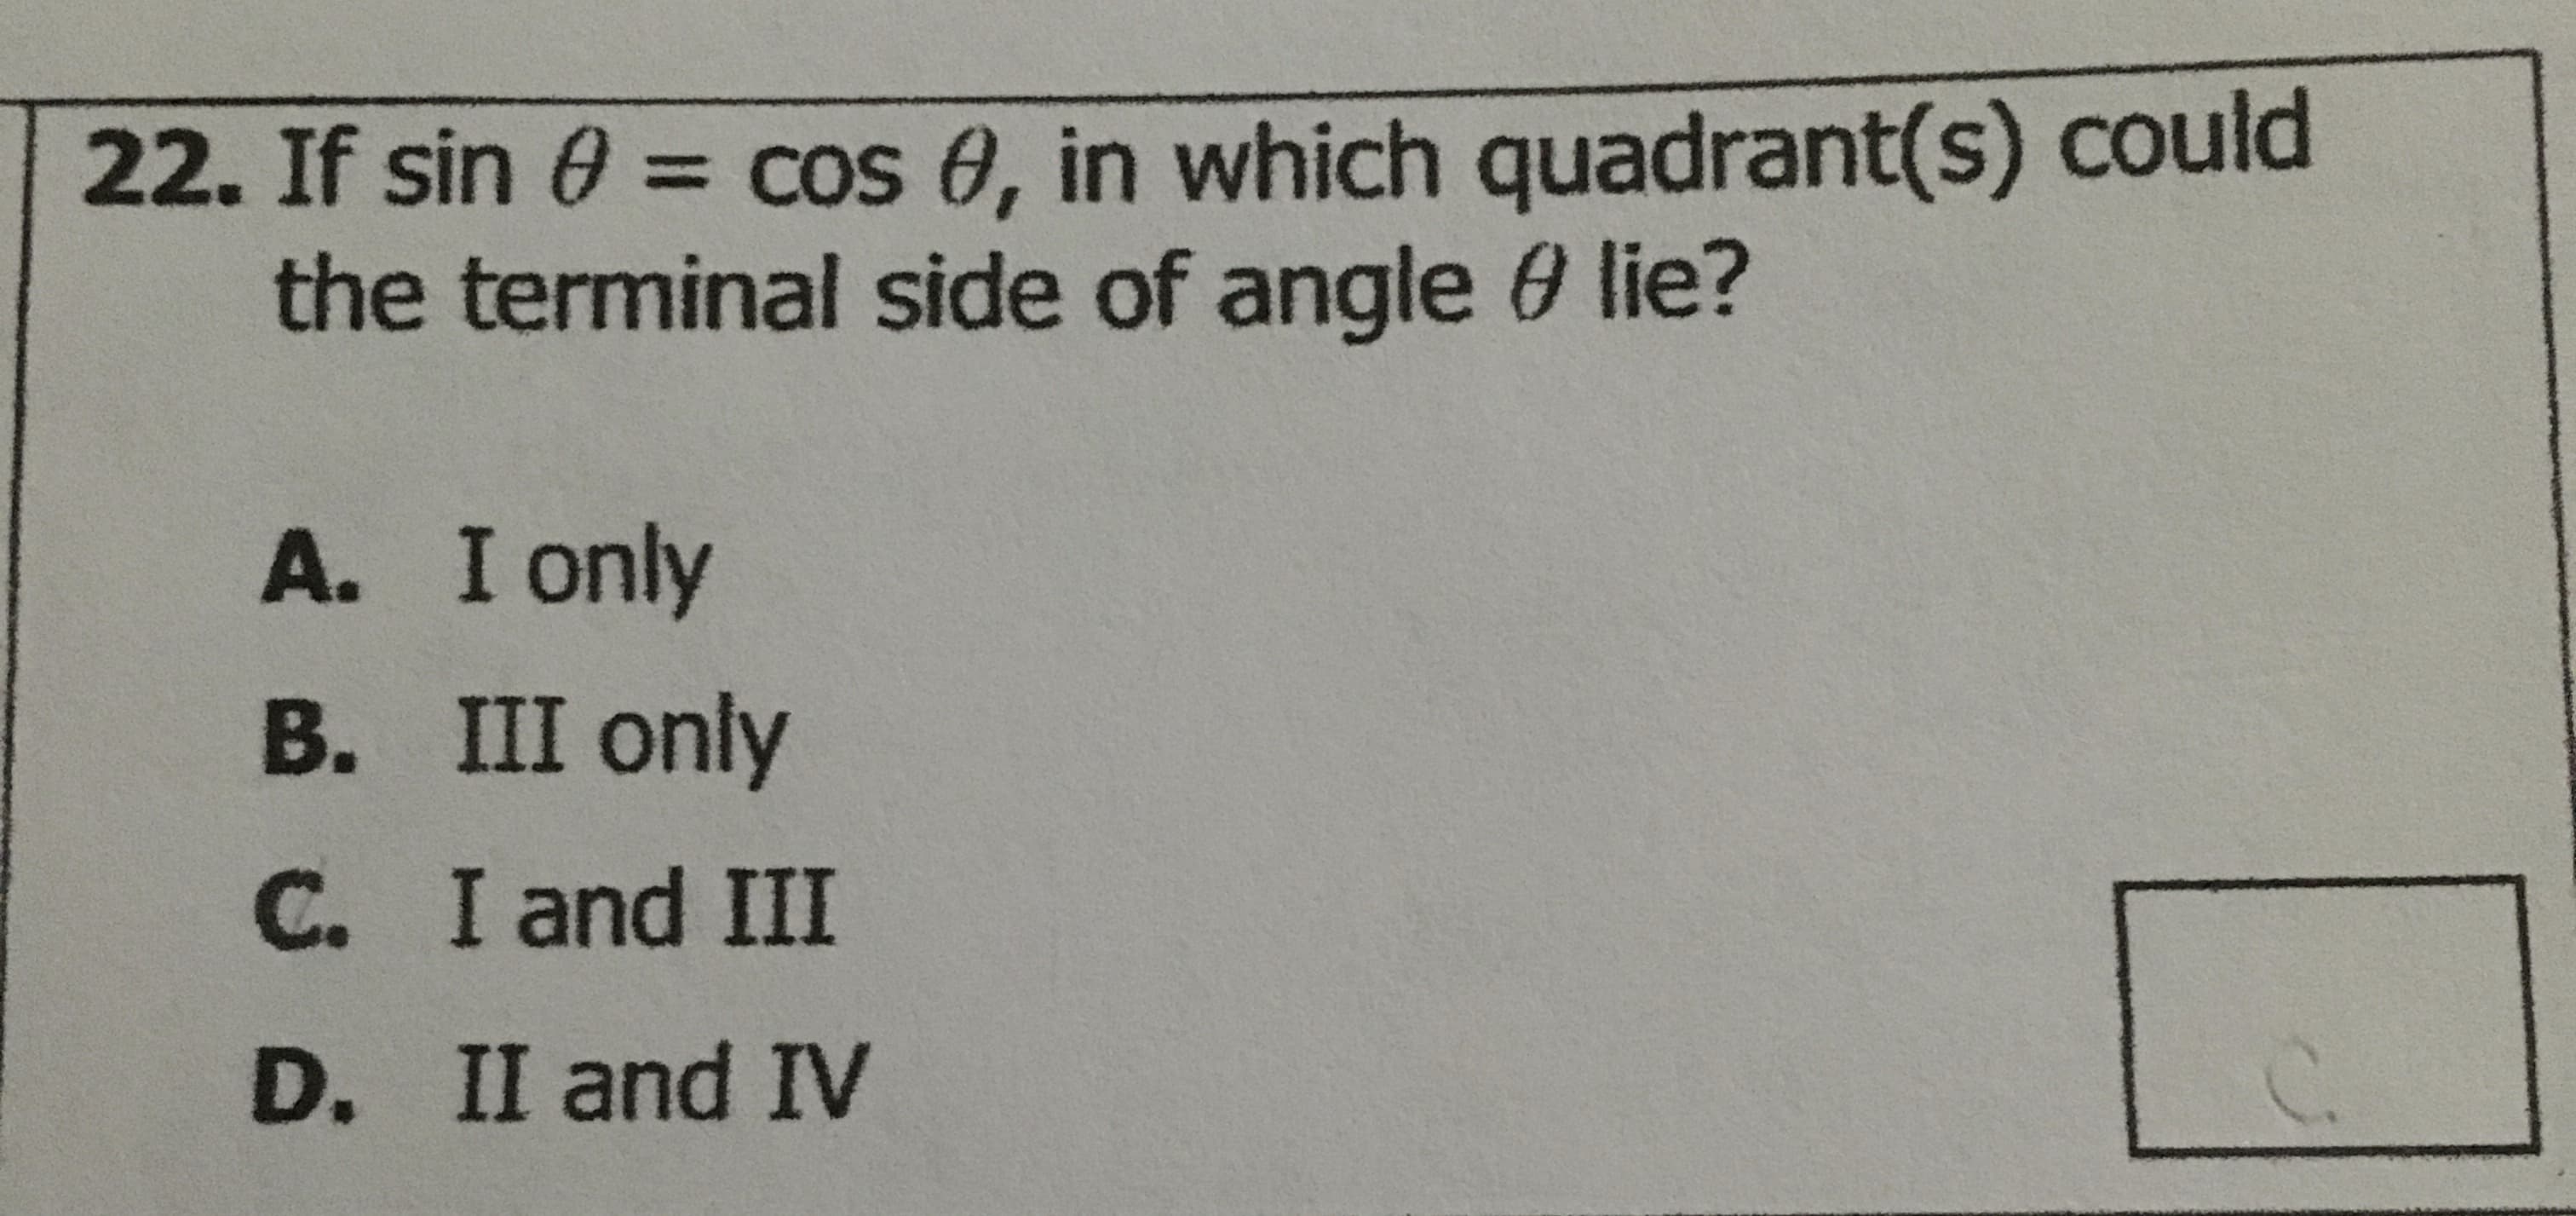 22. If sin 0 = cos 8, in which quadrant(s) could
the terminal side of angle 0 lie?
A. I only
B. III only
C. I and III
D. II and IV
